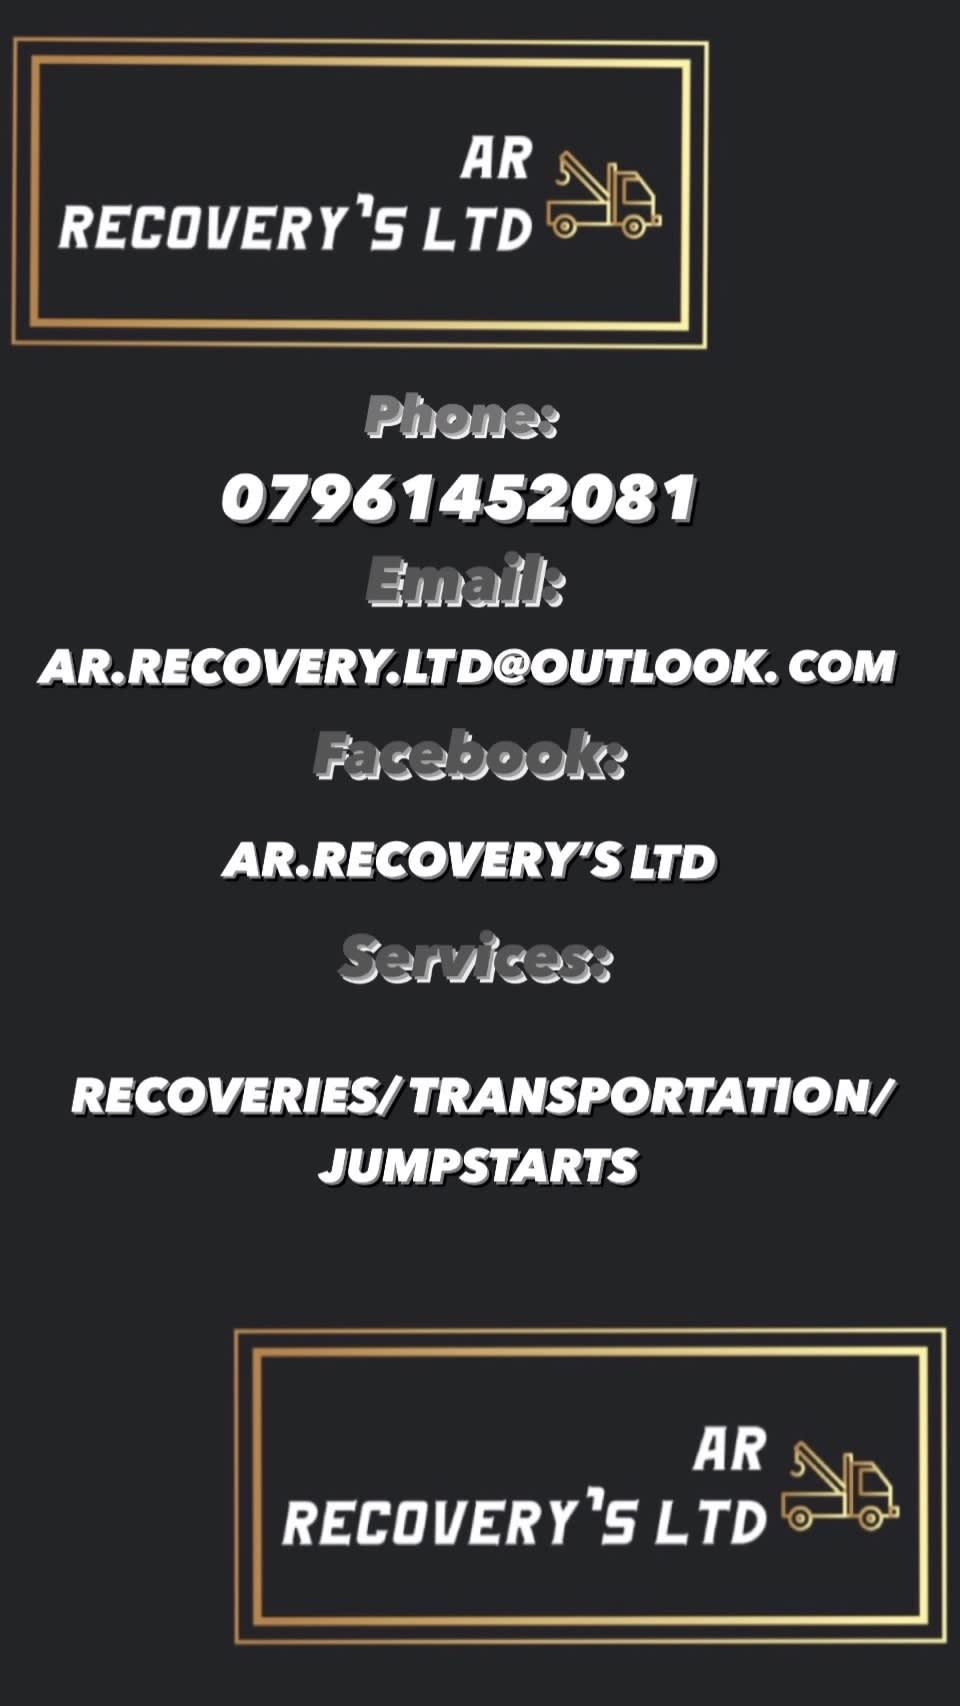 Images AR Recovery's Ltd